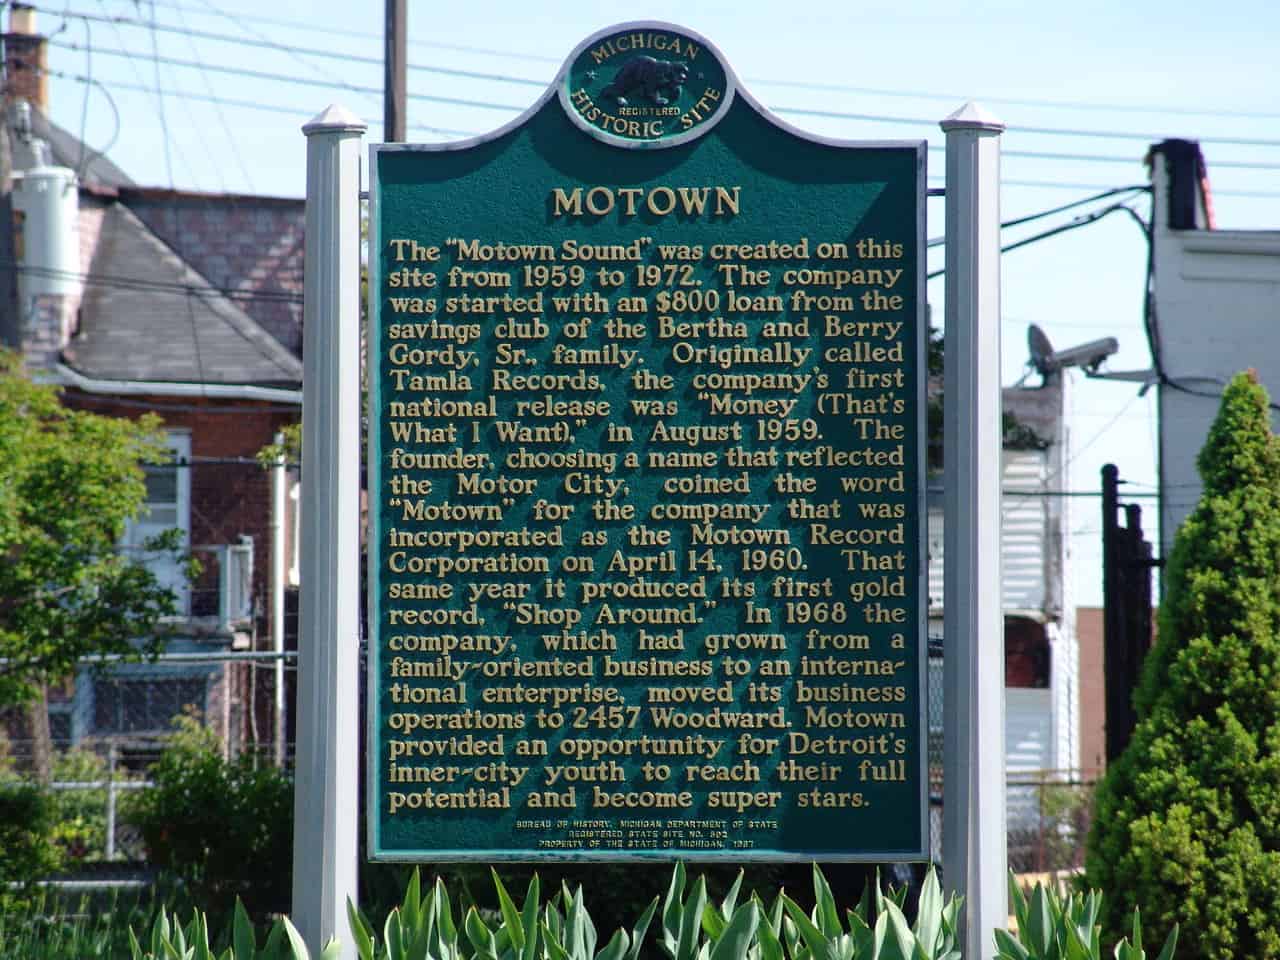 Motown historical marker outside the Motown Museum in Detroit, Michigan